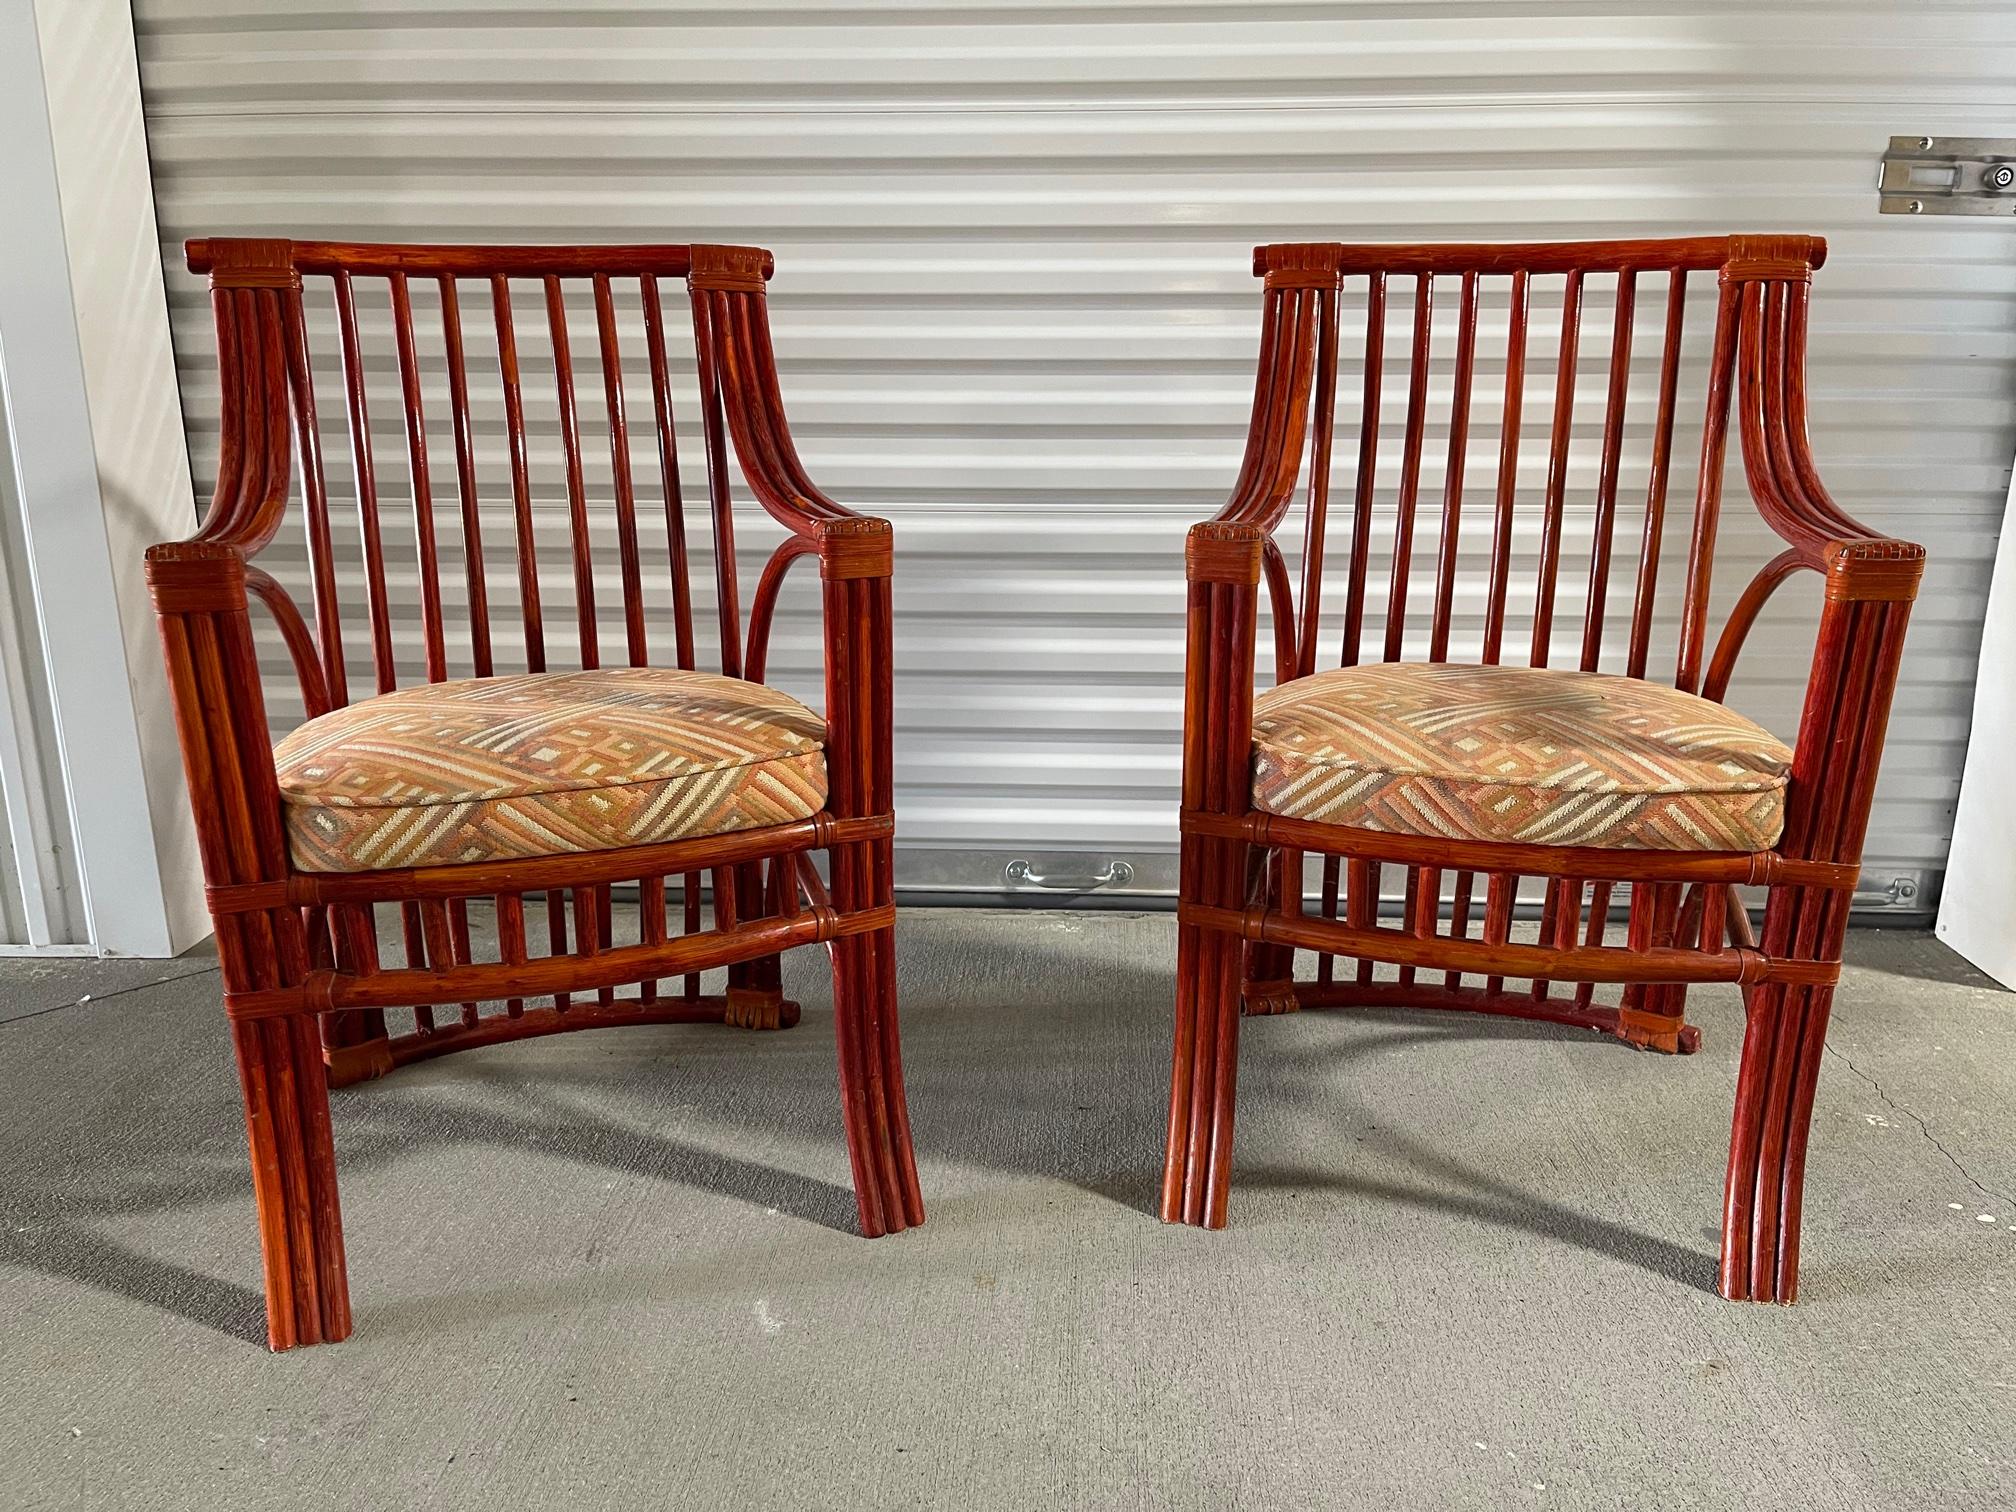 Pair of Chinese style red lacquer rattan chairs created by Maugrion Editions, made in France for Roche Bobois, 20th century. Upholstered cushions.
    